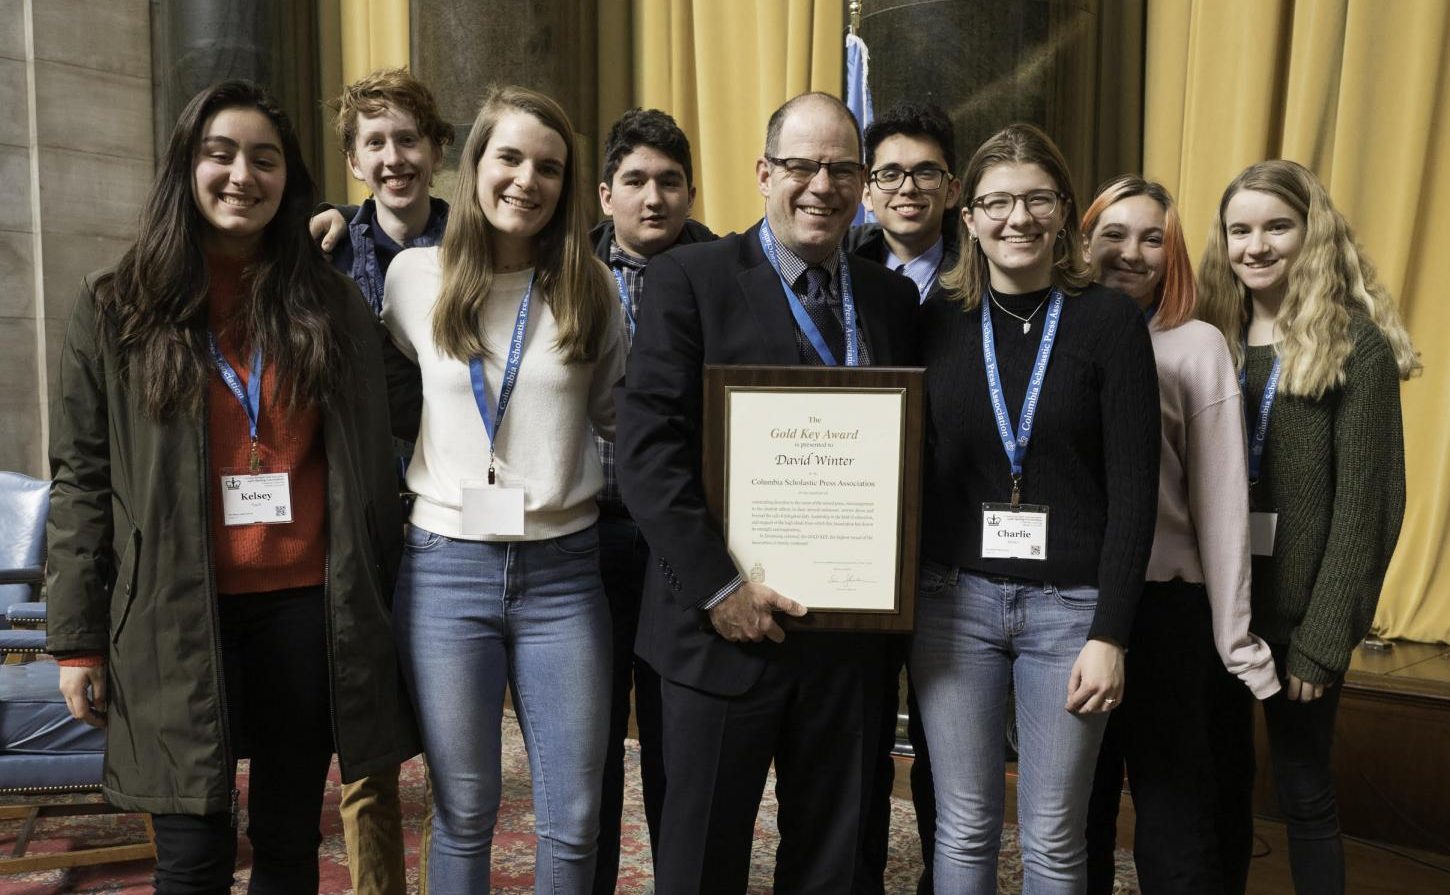 The McCallum delegation at the Columbia Scholastic Press Association pose for a pic after the adviser awards luncheon in the Low Library rotunda. Photo by Mark Murray.